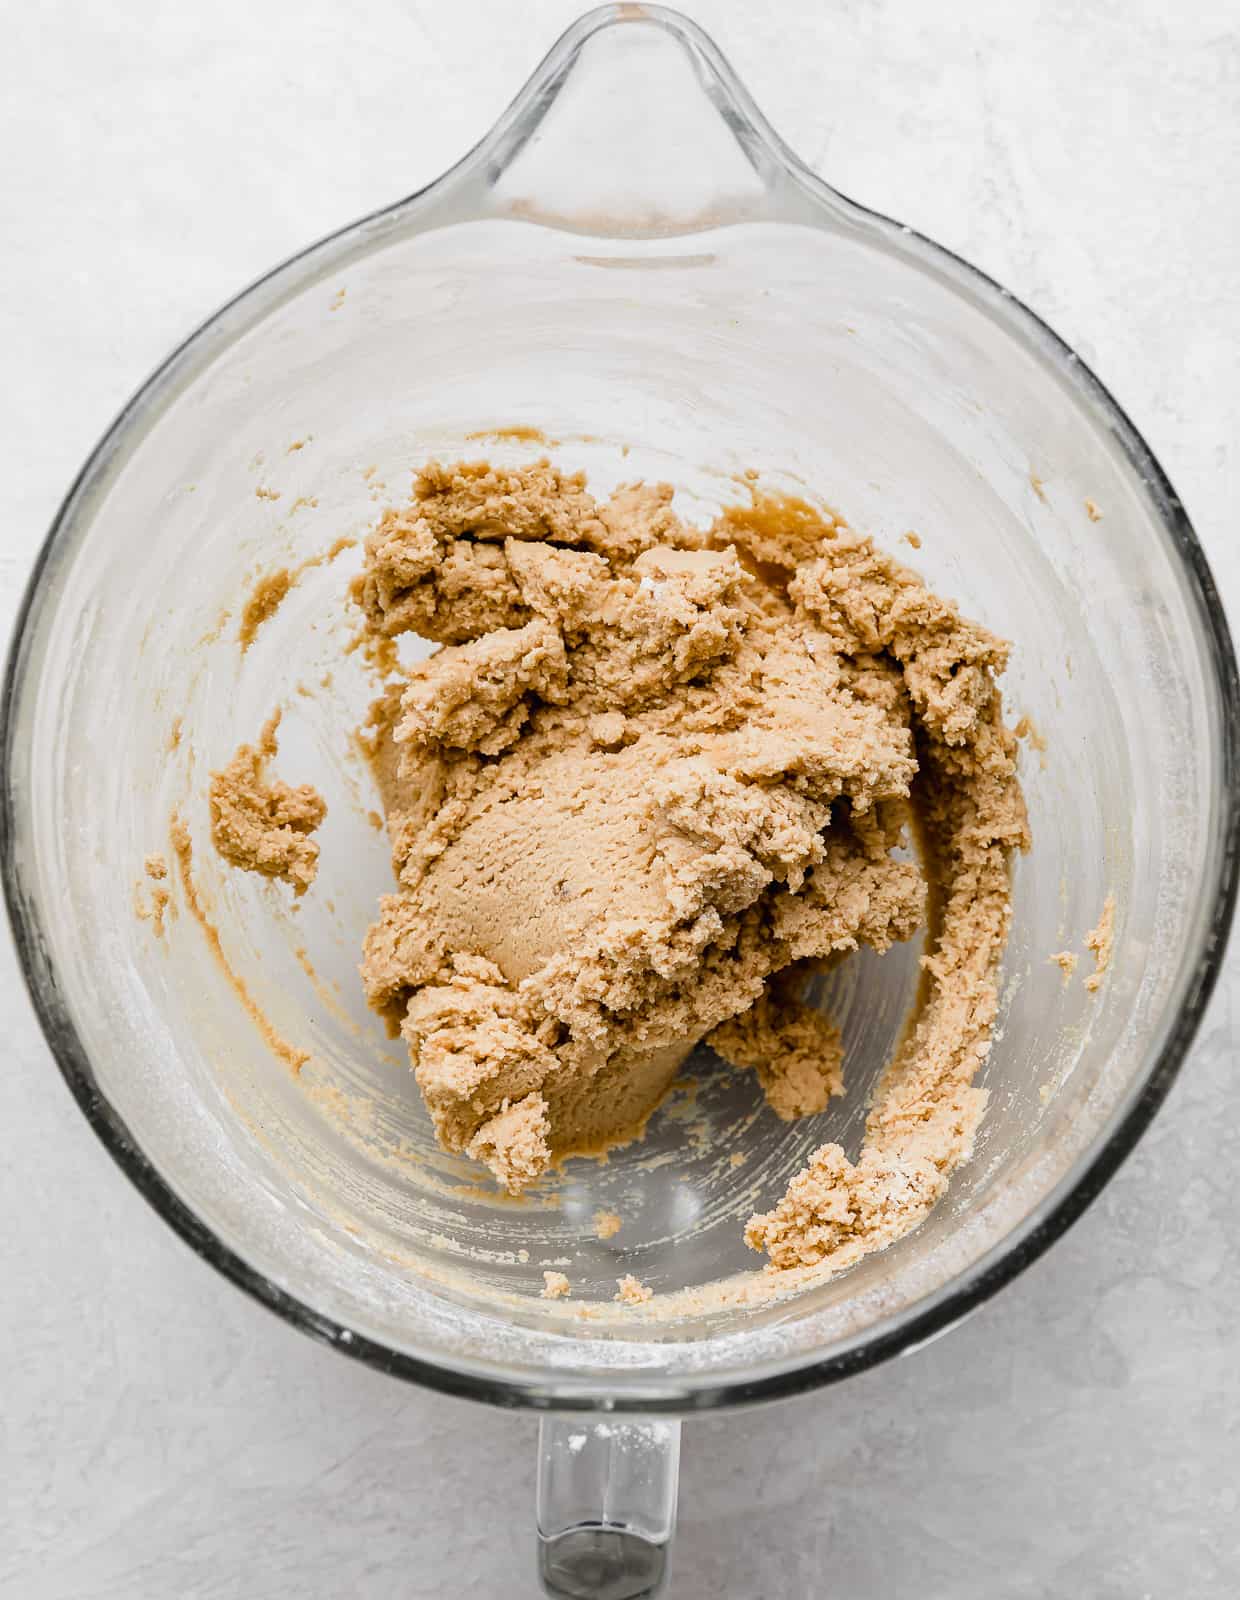 Crumbl Peanut Butter Blossom Cookie dough in a glass mixing bowl on a white background.